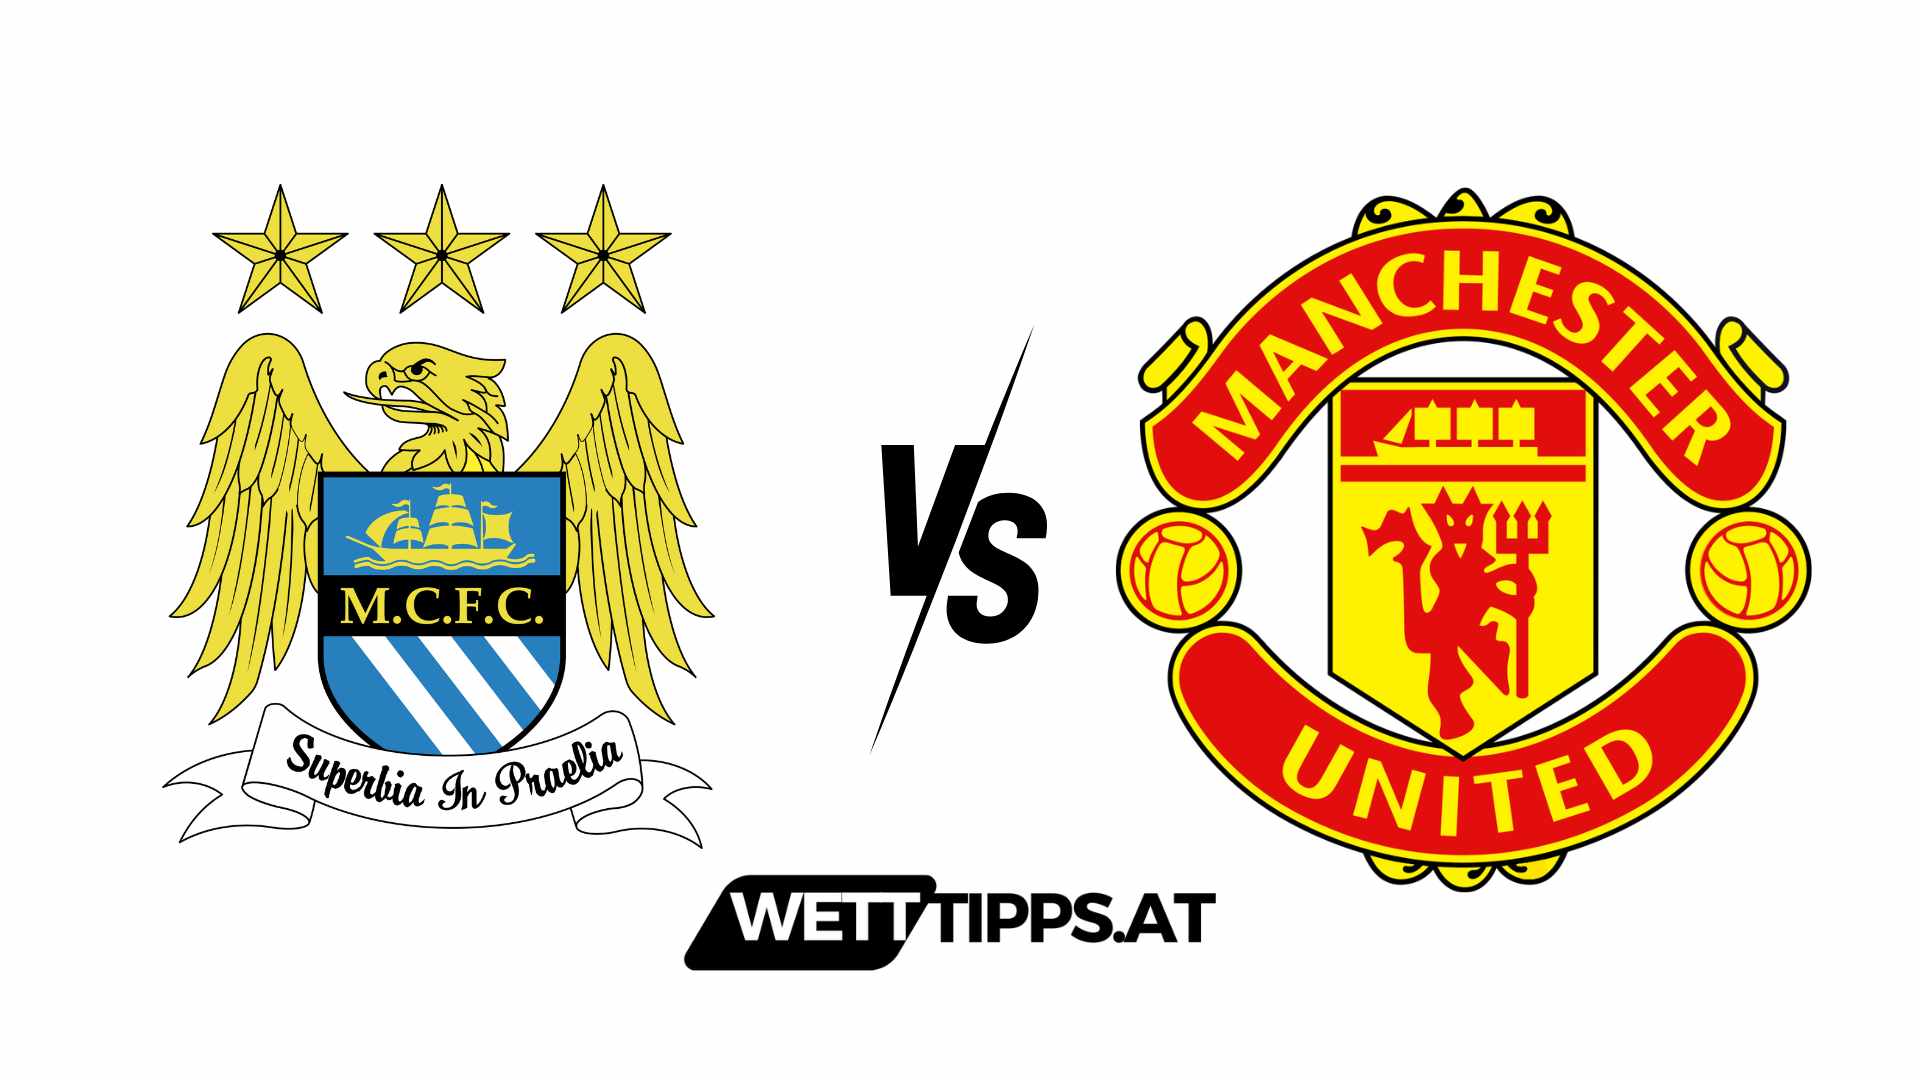 Manchester City vs Manchester United FA Cup Finale Wett Tipps